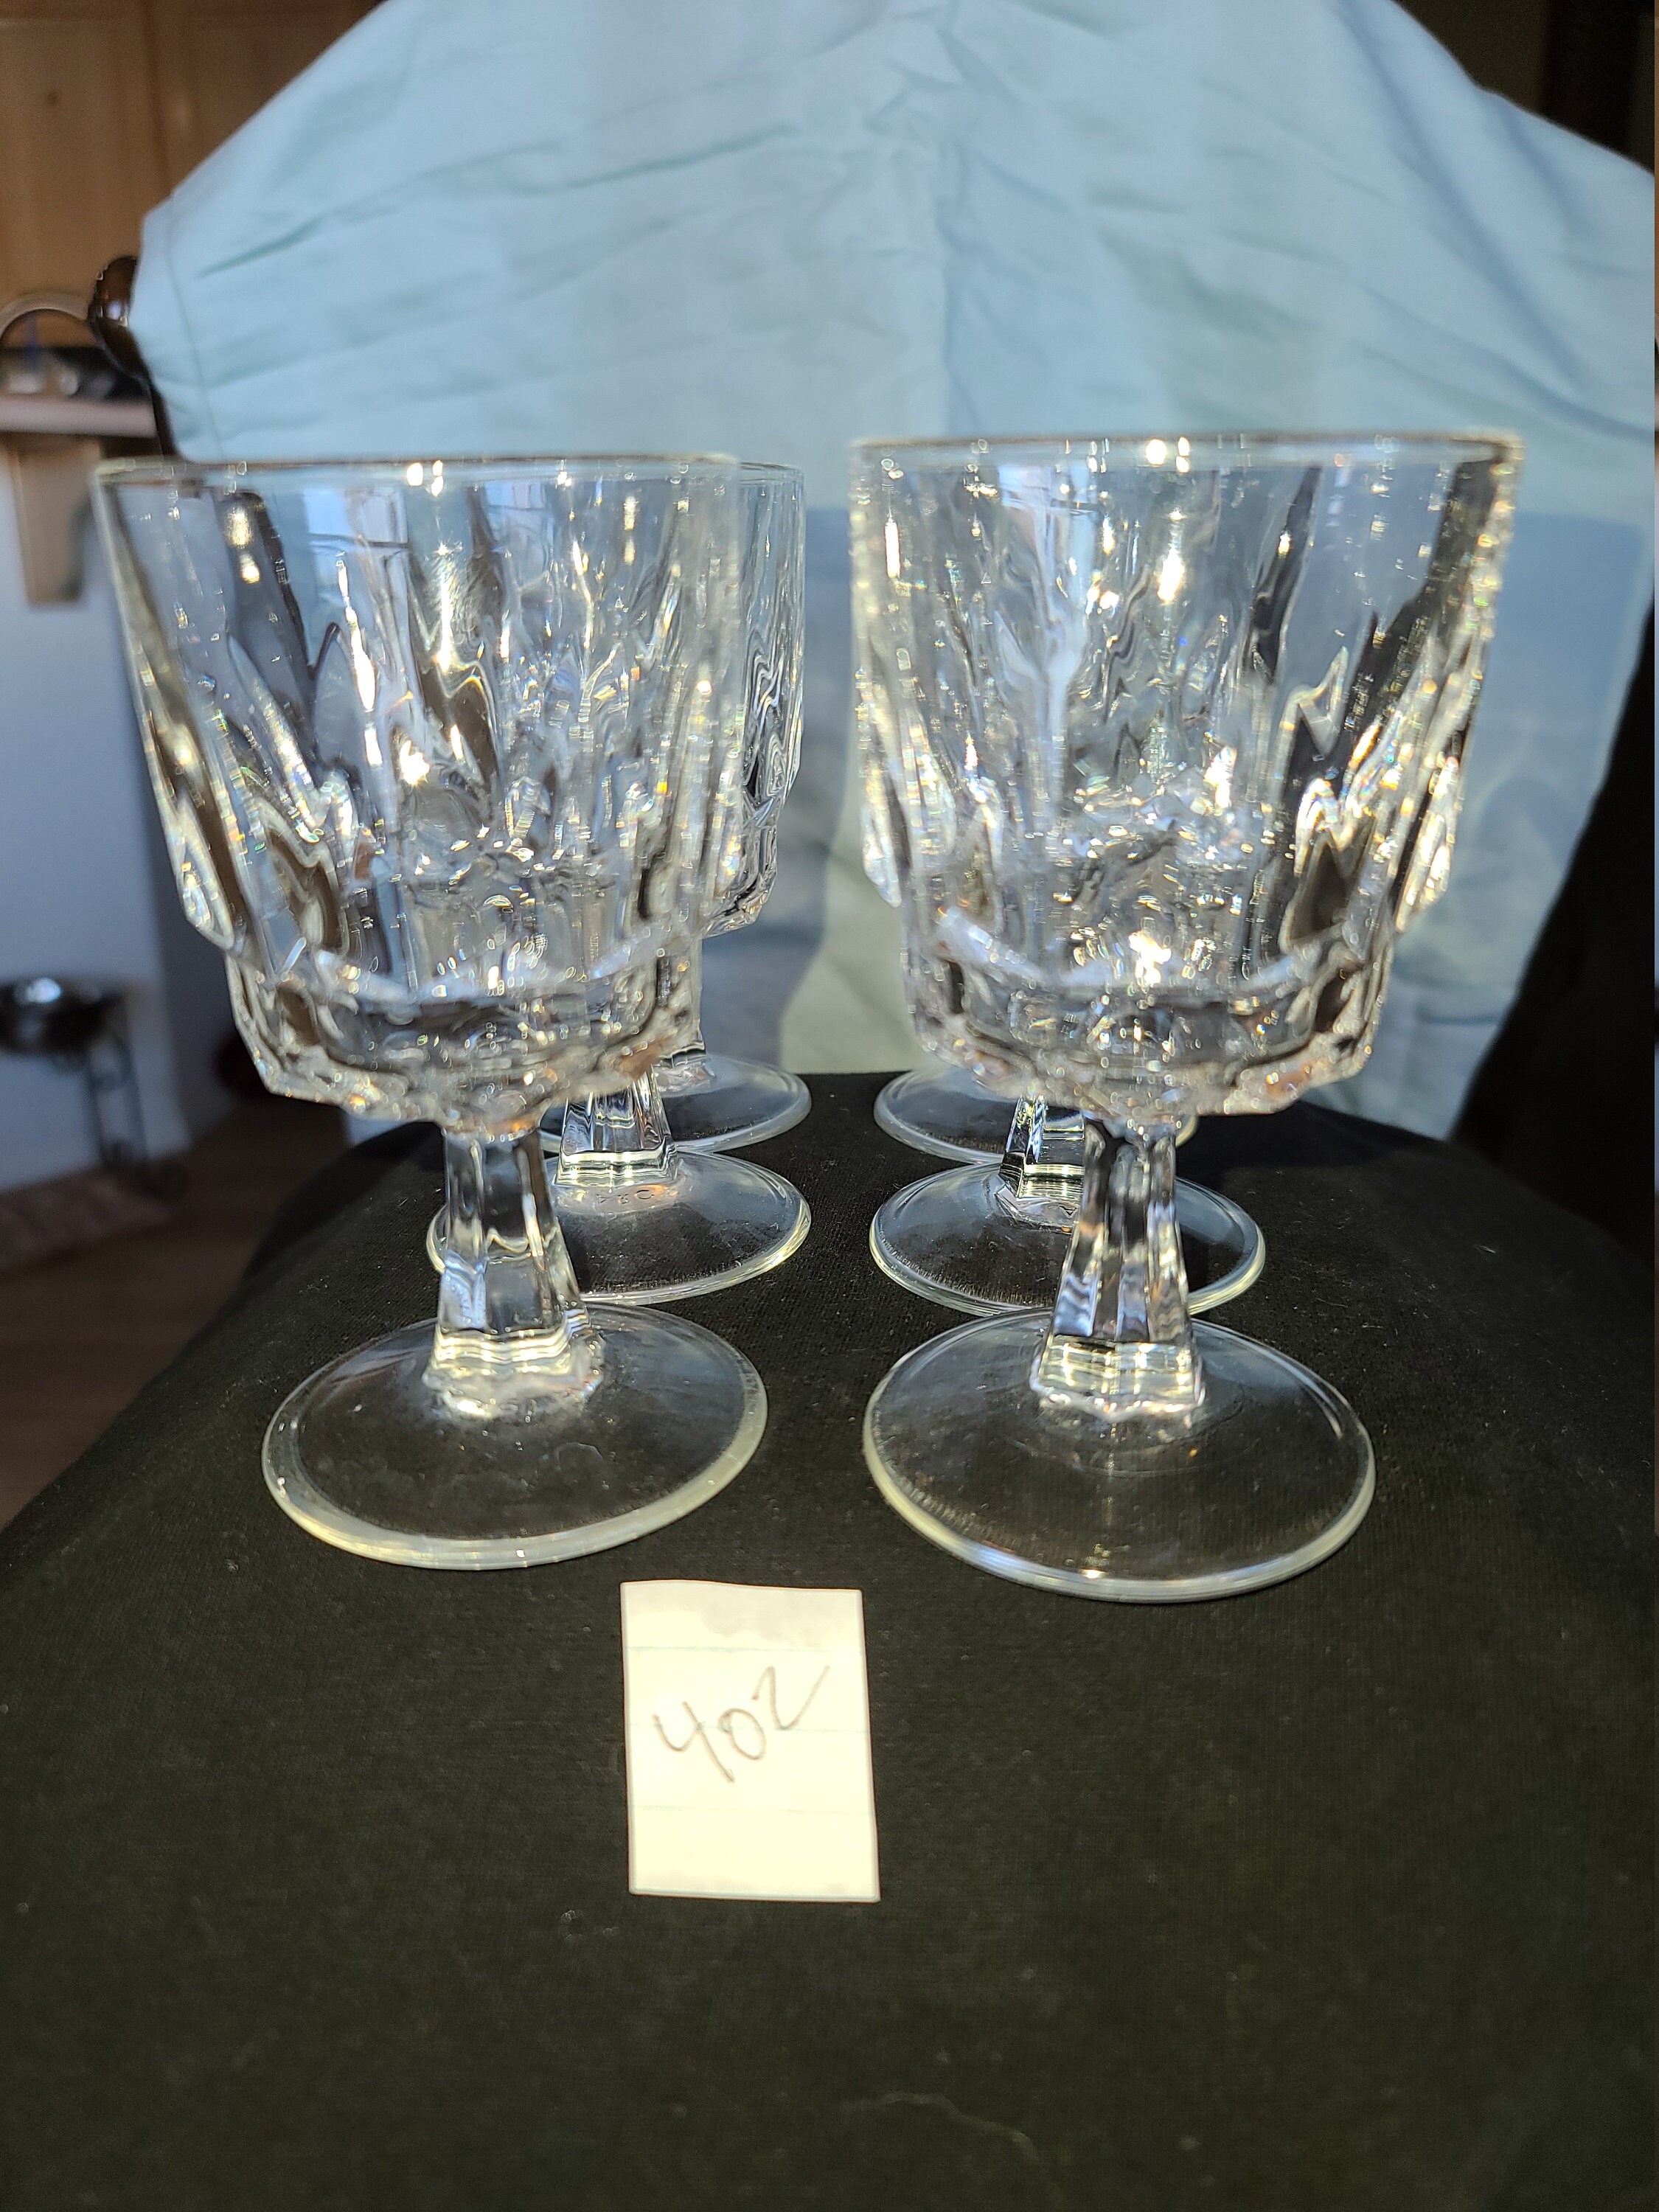 Late 20th Century Crystal Cut Wine Glasses- Set of 6